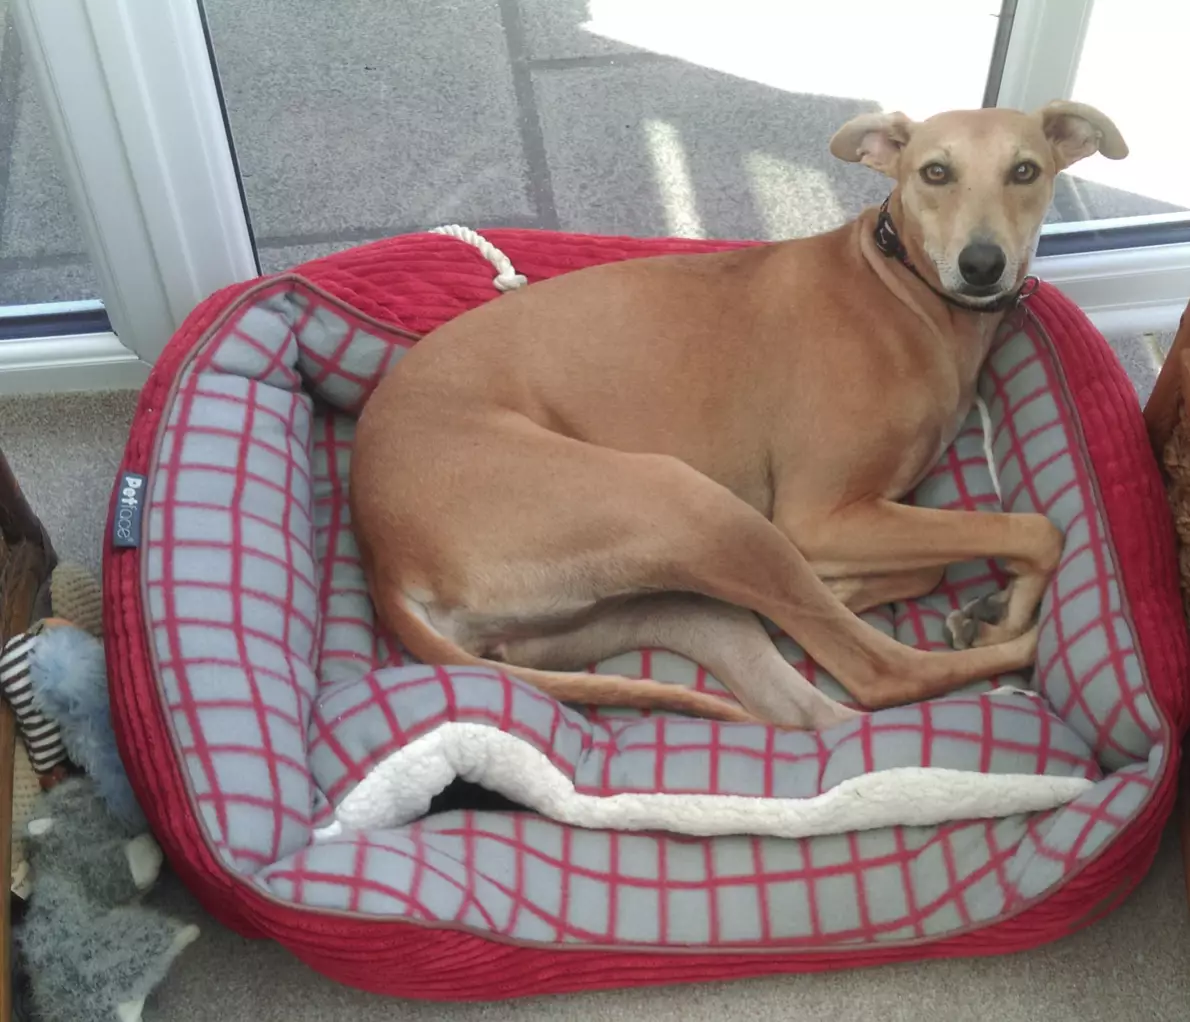 Lily has now been re-homed (